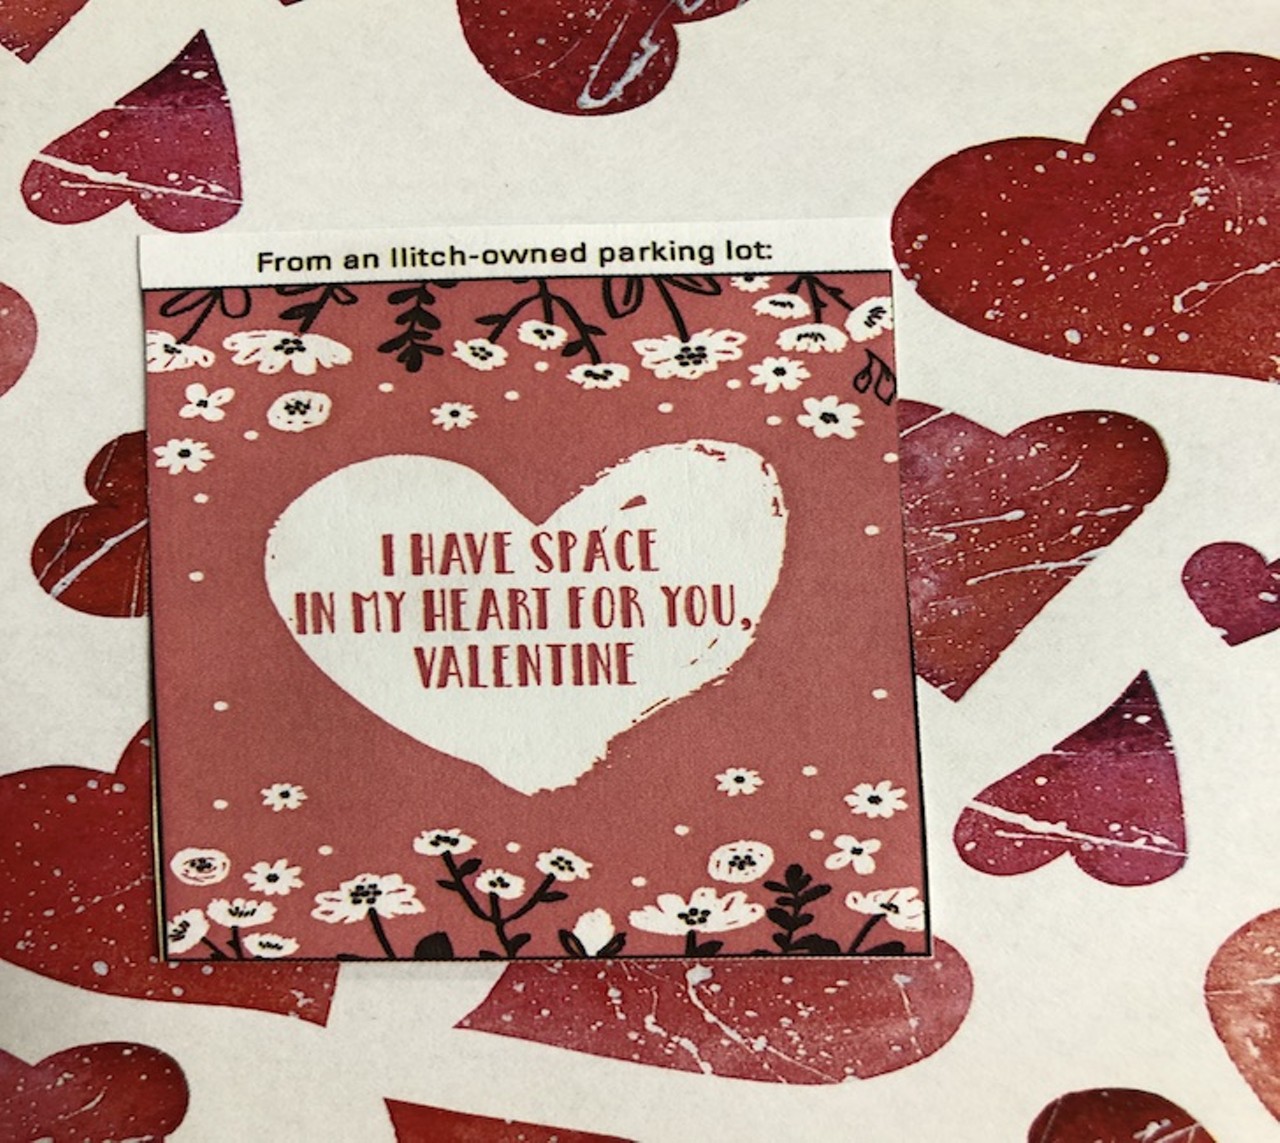 From an Illitch-owned parking lot:
I have space in my heart for you, Valentine.